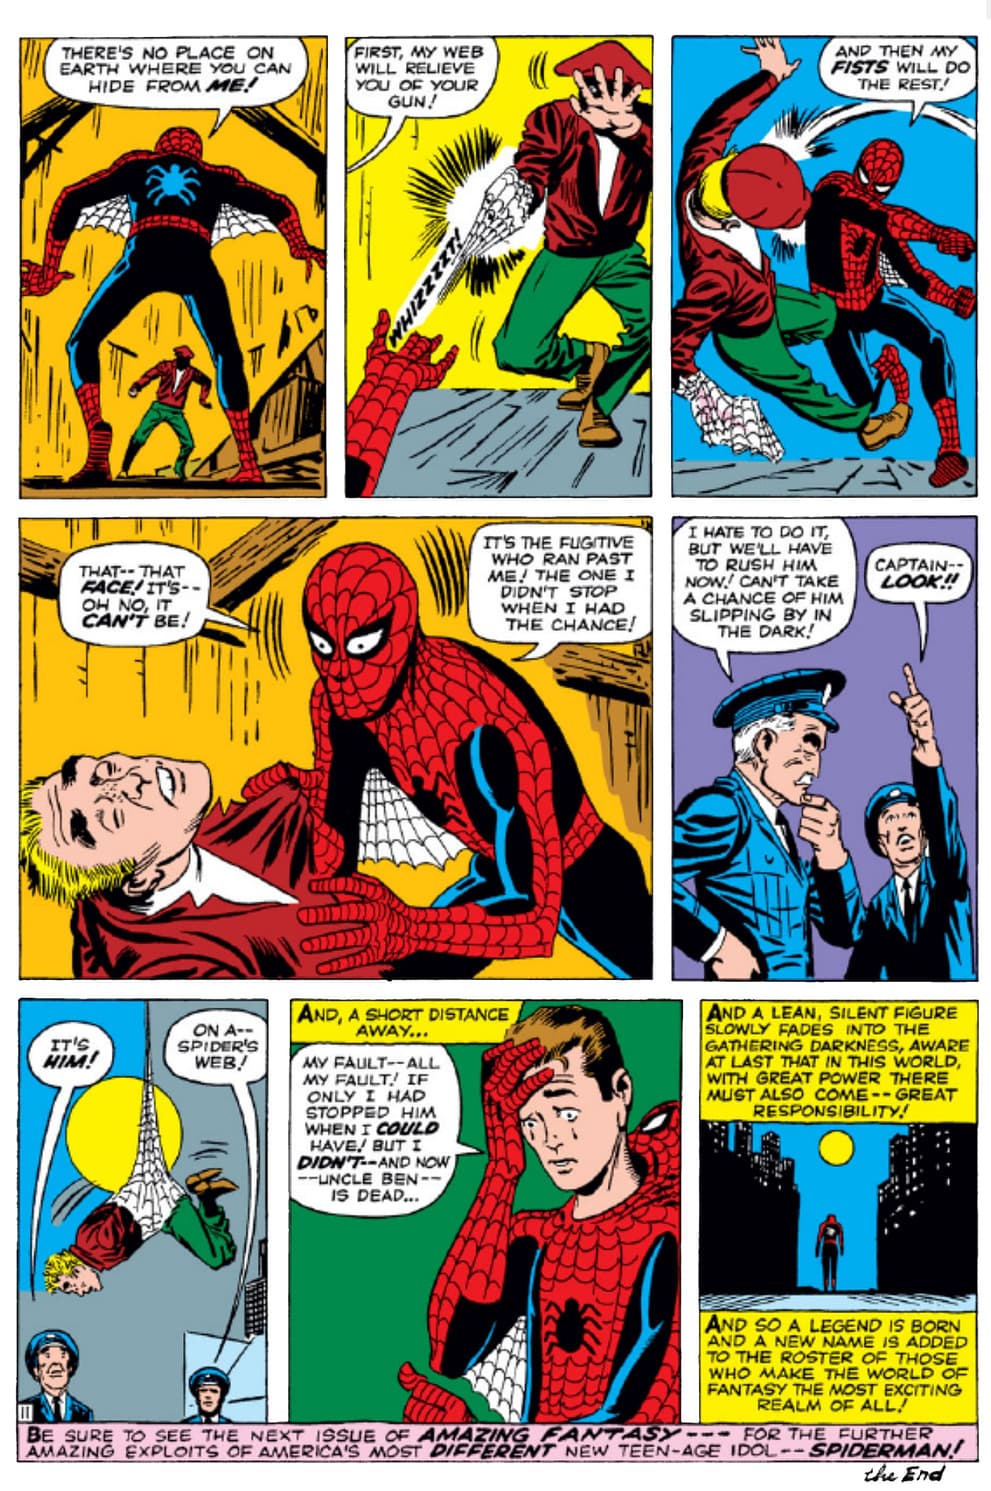 AMAZING FANTASY (1962) #15 page by Stan Lee, Steve Ditko, and Stan Goldberg